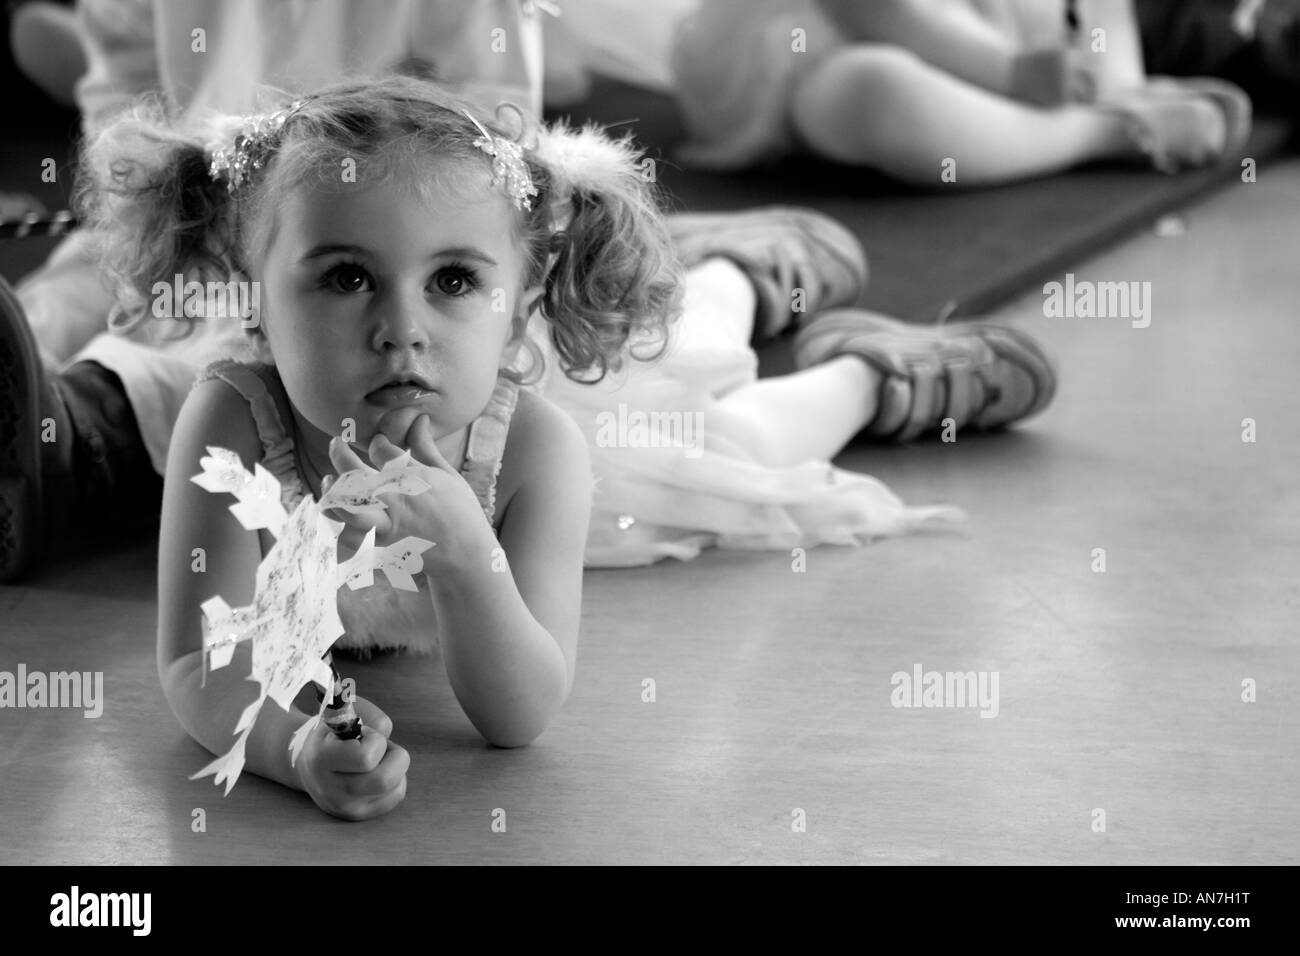 Thoughtful girl playing a snowflake in a Christmas play Stock Photo